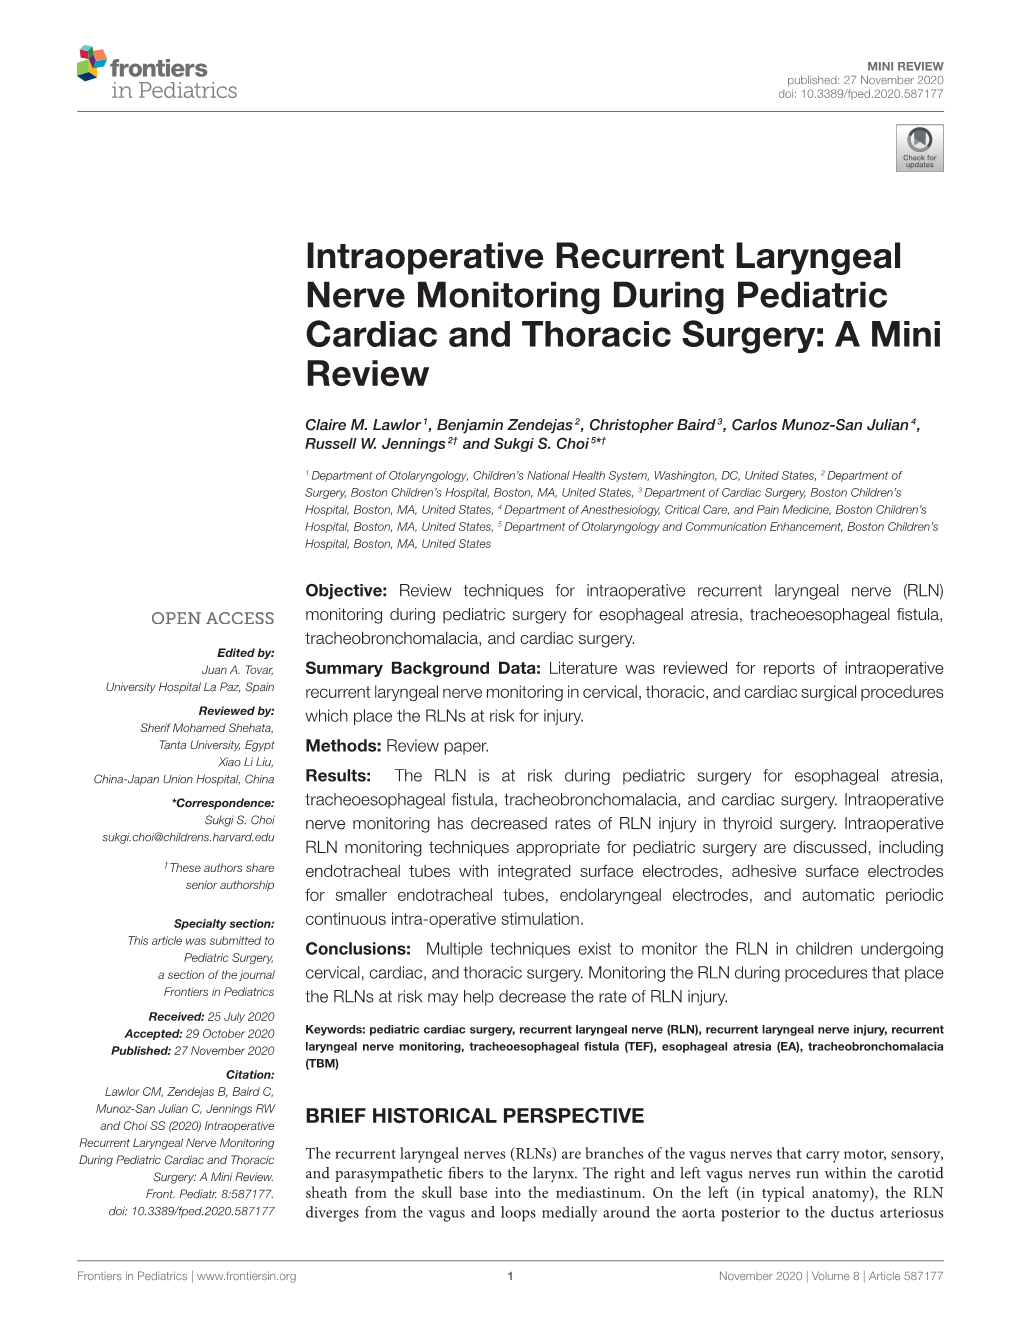 Intraoperative Recurrent Laryngeal Nerve Monitoring During Pediatric Cardiac and Thoracic Surgery: a Mini Review